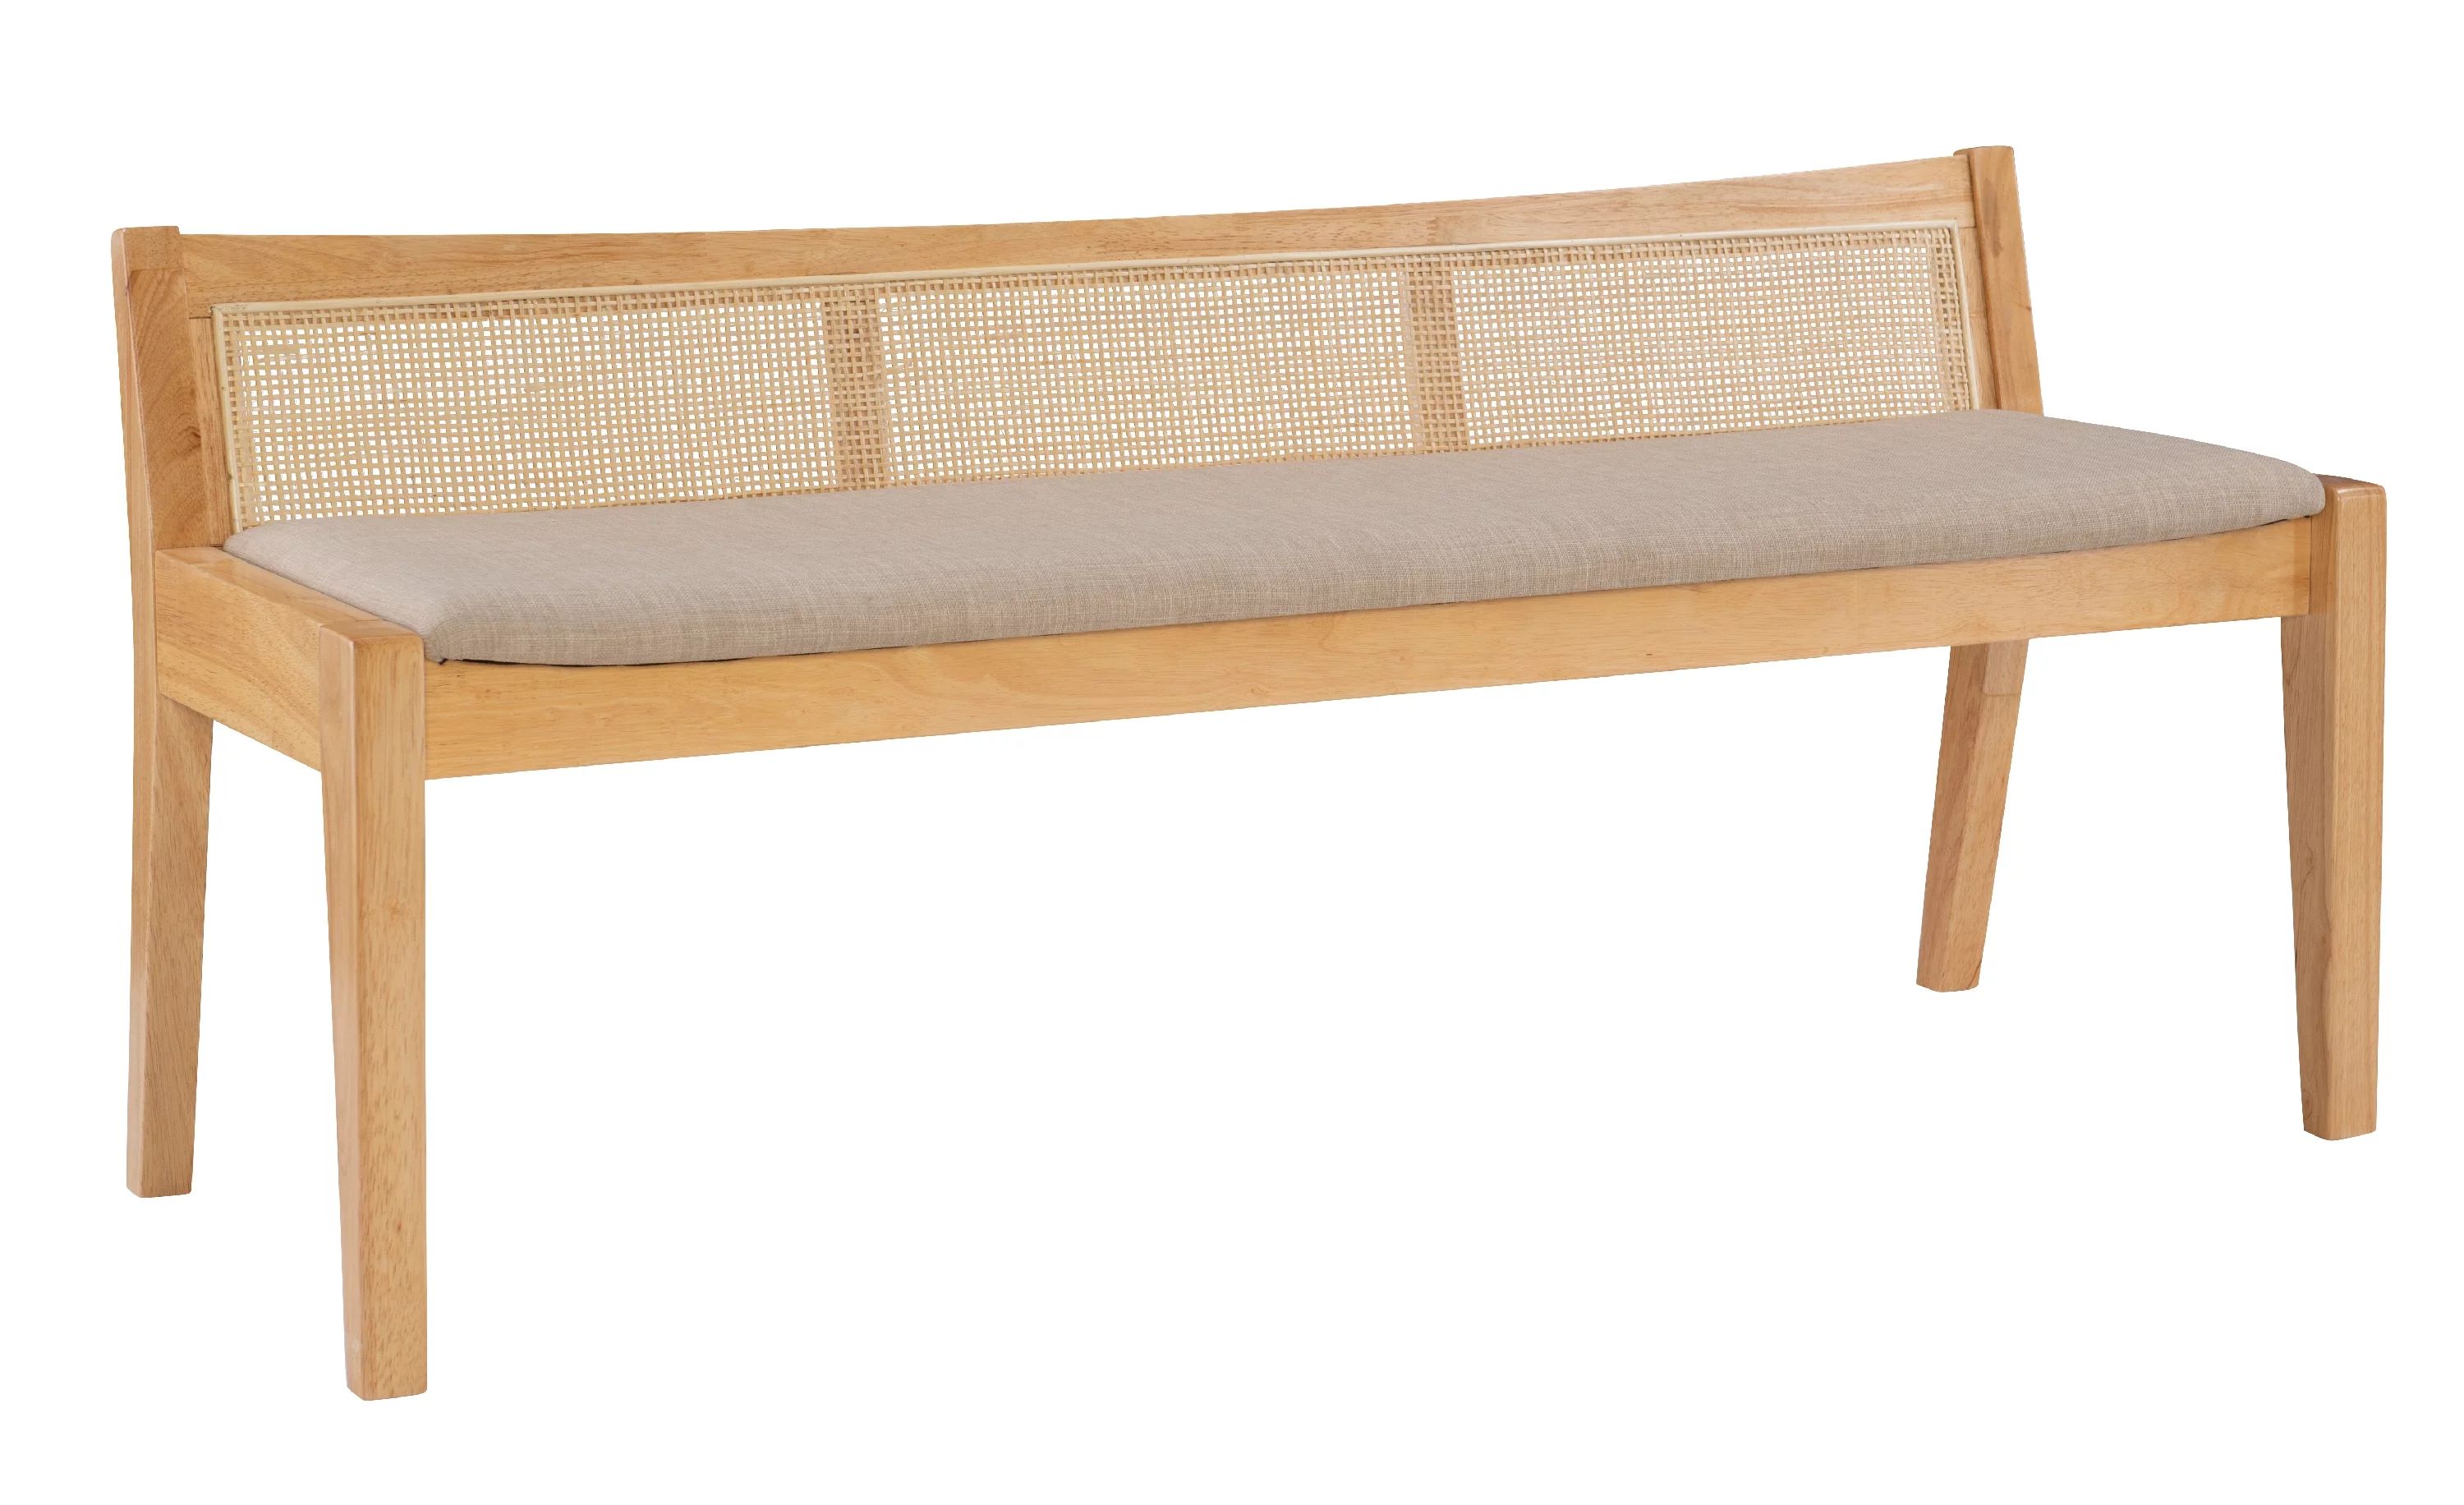 Bilberry Bench with Rattan Cane Back, Natural Frame with Beige Fabric | Walmart (US)